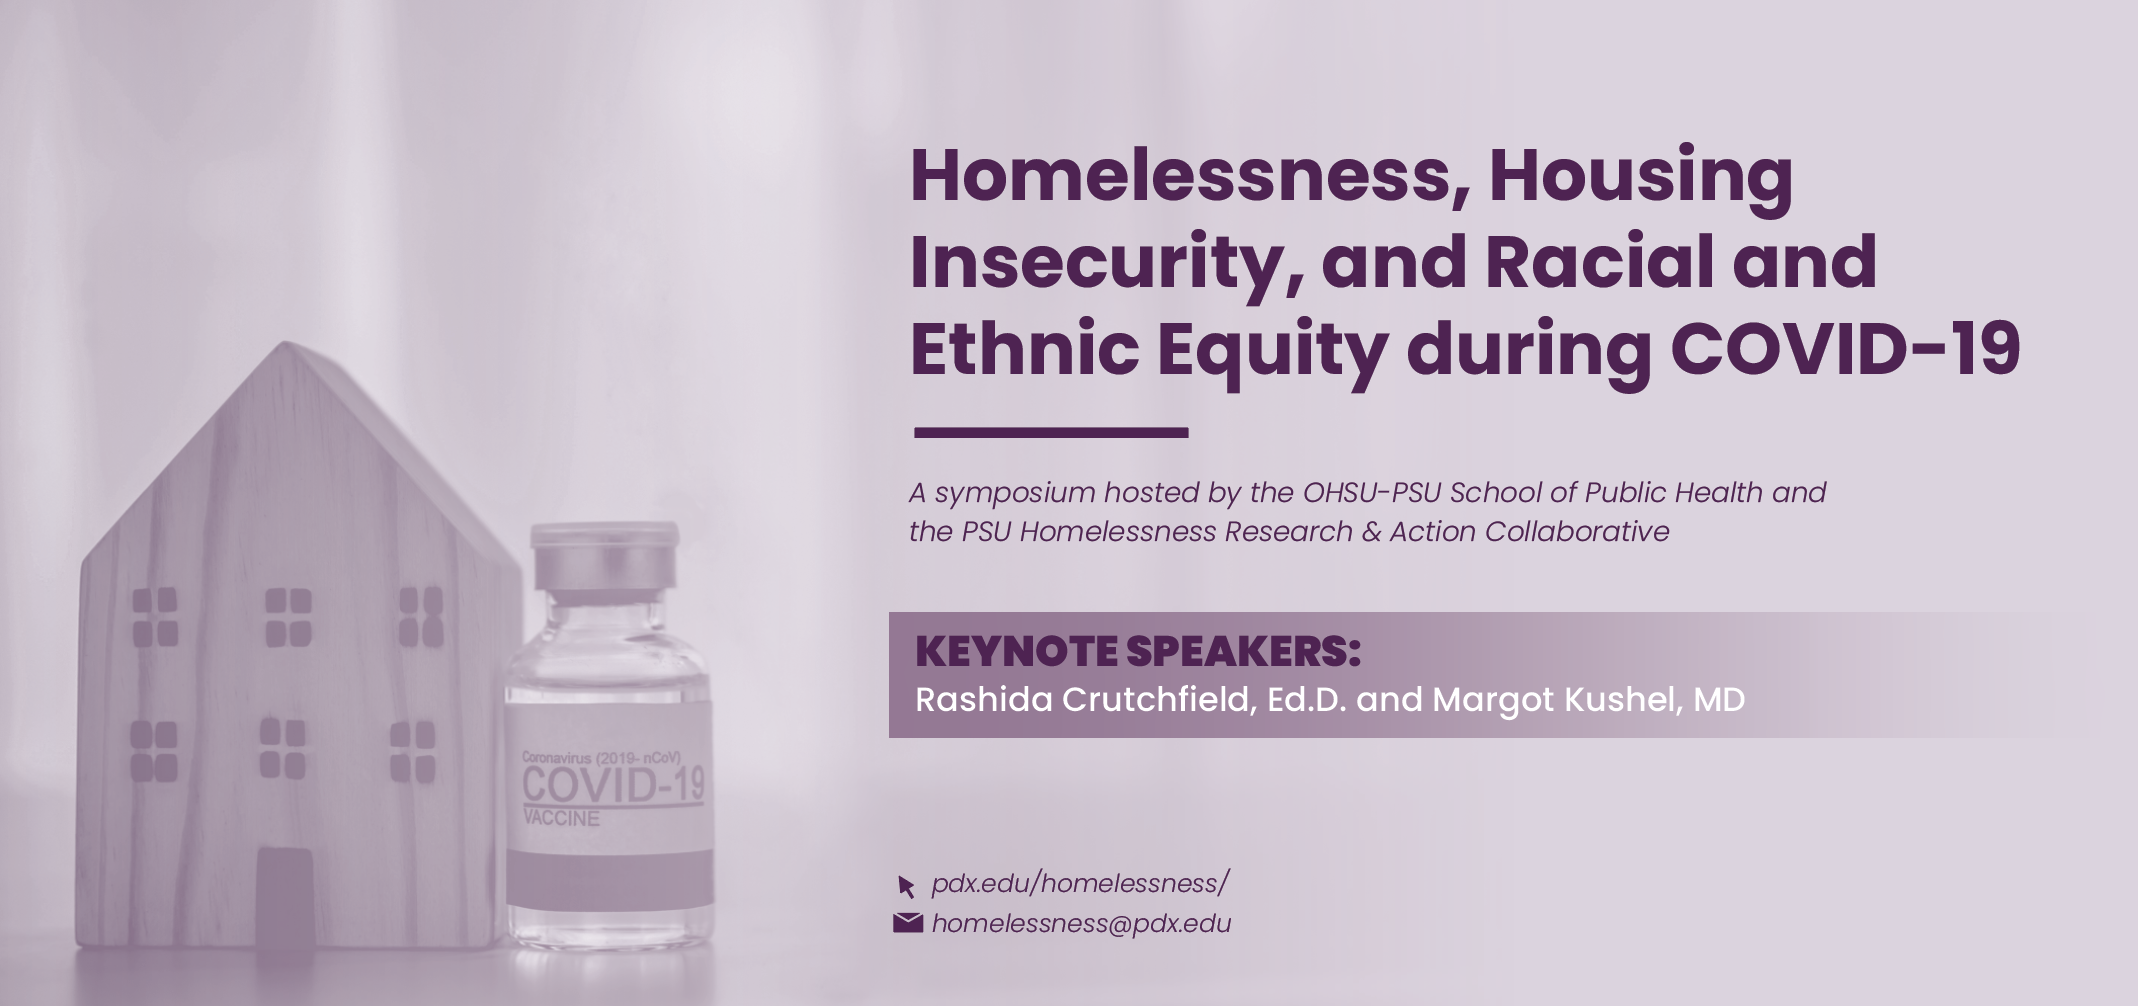 Purple promo graphic that reads: Homelessness, Housing insecurity, and Racial and Ethnic Equity during COVID-19- A symposium hosted by the OHSU-PSU school of Public Health and the PSU Homelessness Research and Action Collaborative. Keynote speakers: Rashida Crutchfield, Ed.D. and Margot Kushel, MD. There are images of a small wooden house and a vile of the COVID-19 vaccine. The center's email address and website are listed at the bottom. 